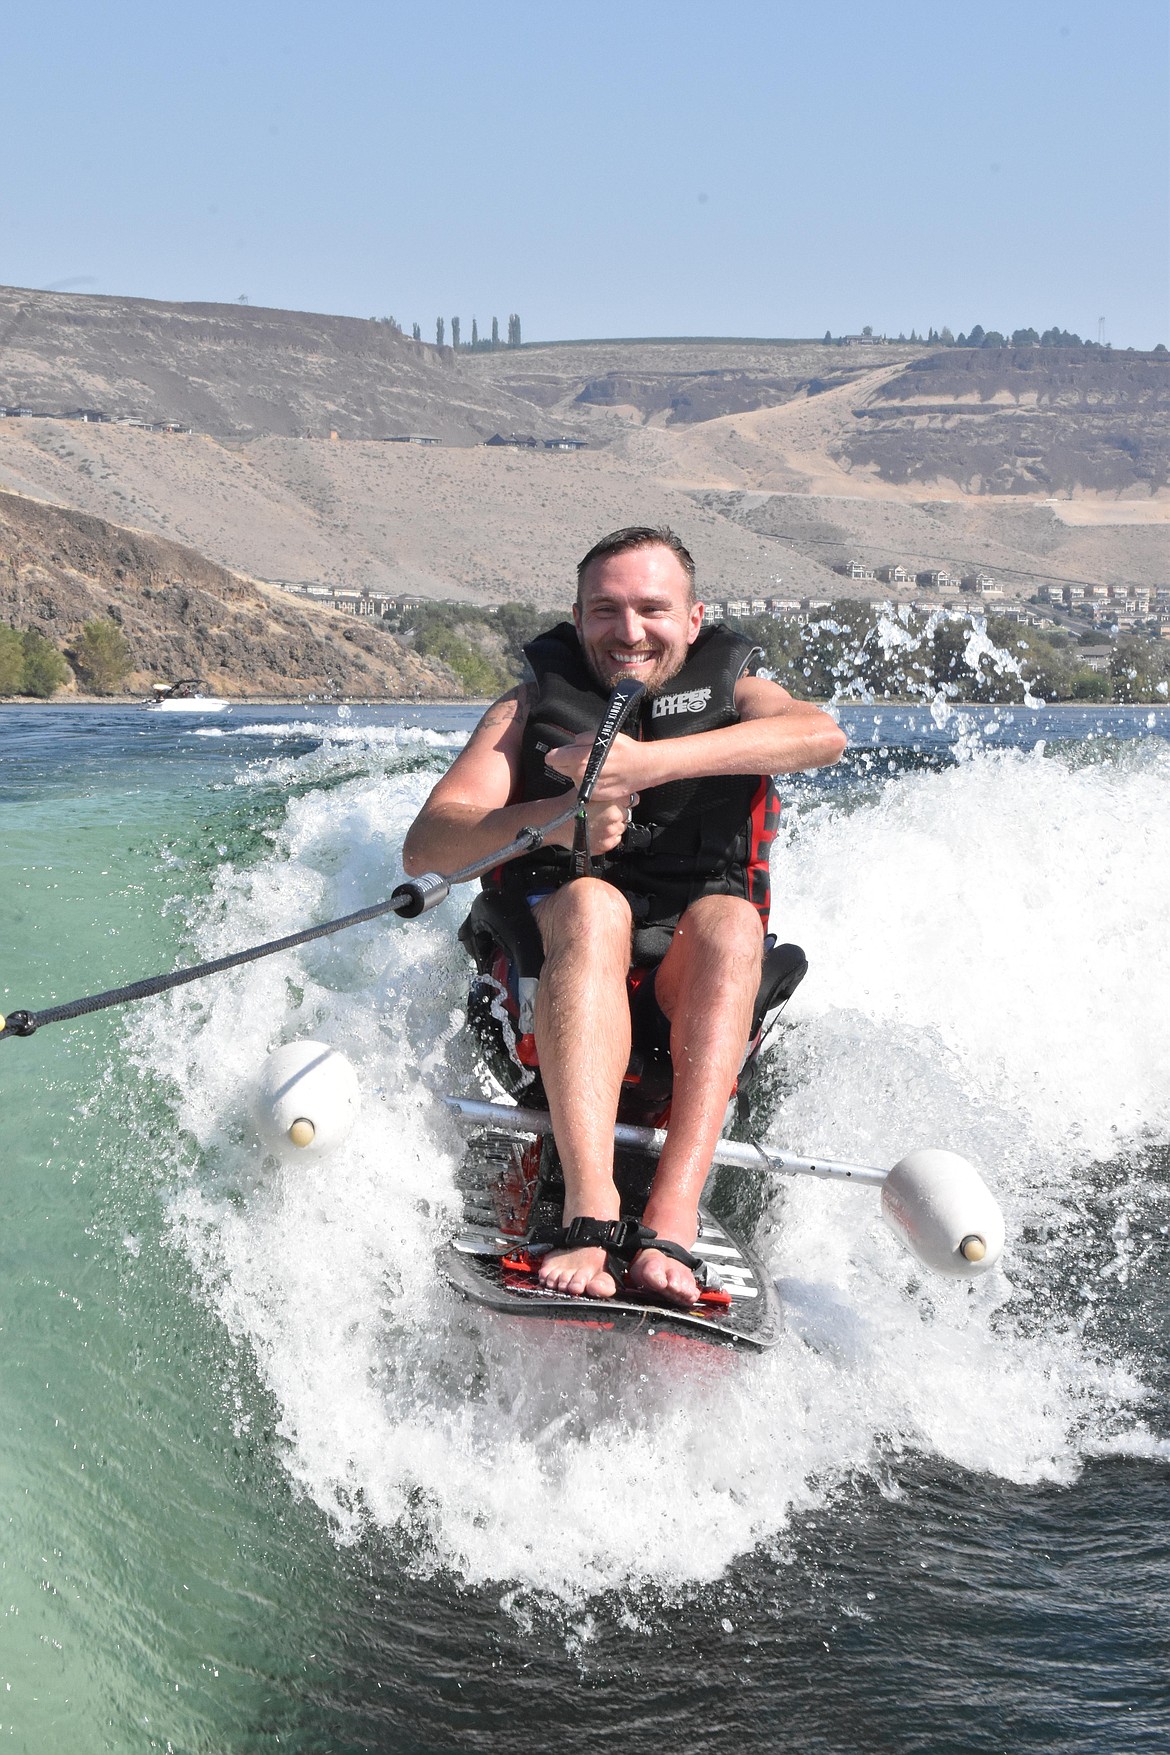 Patrick Edlin smiles as he wakesurfs on a sit-down board on the Columbia River Saturday.